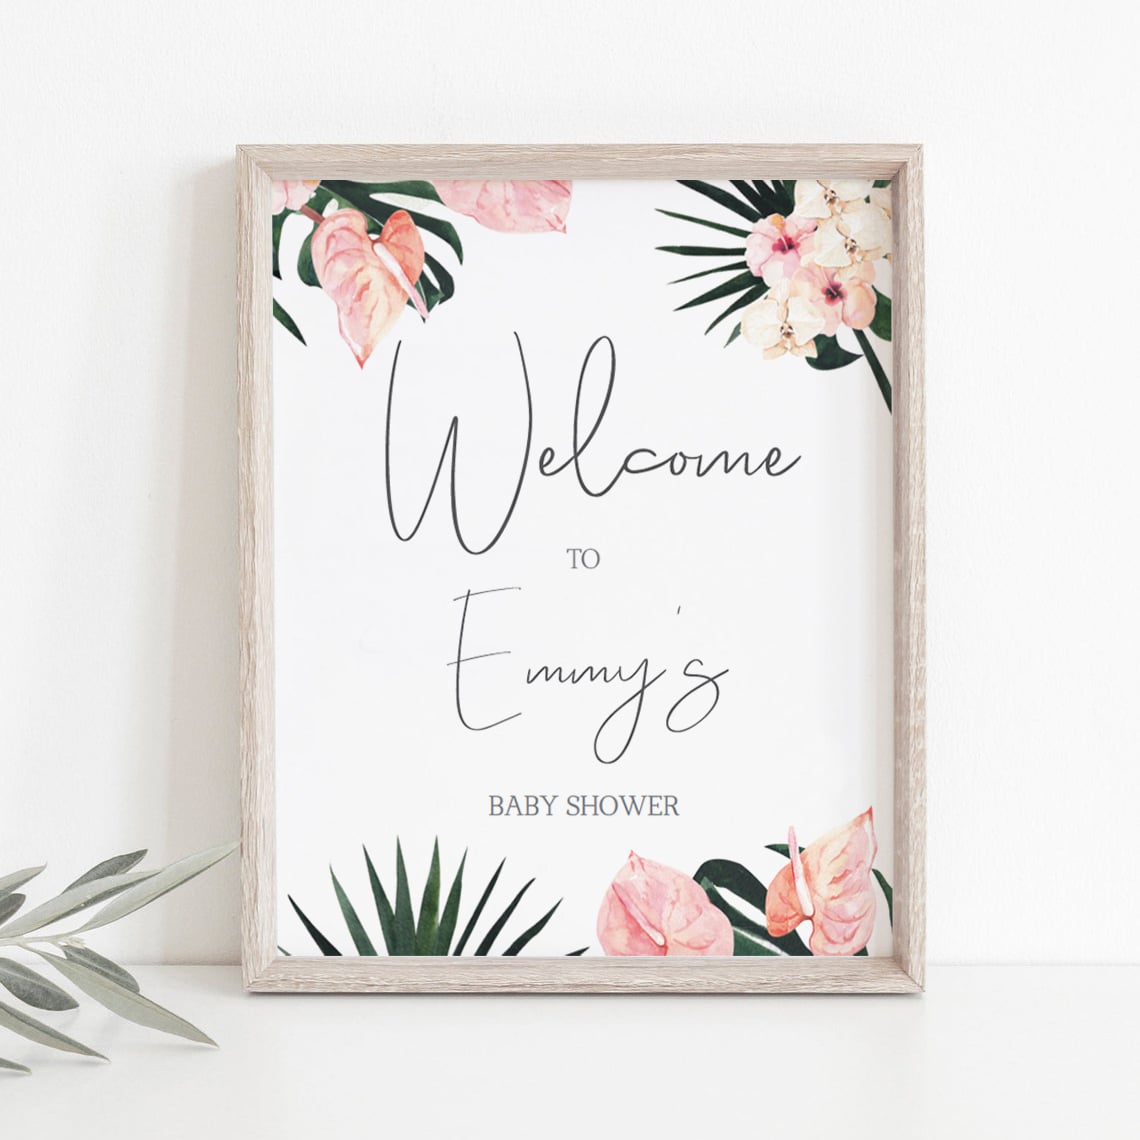 DIy baby shower welcome board template by LittleSizzle